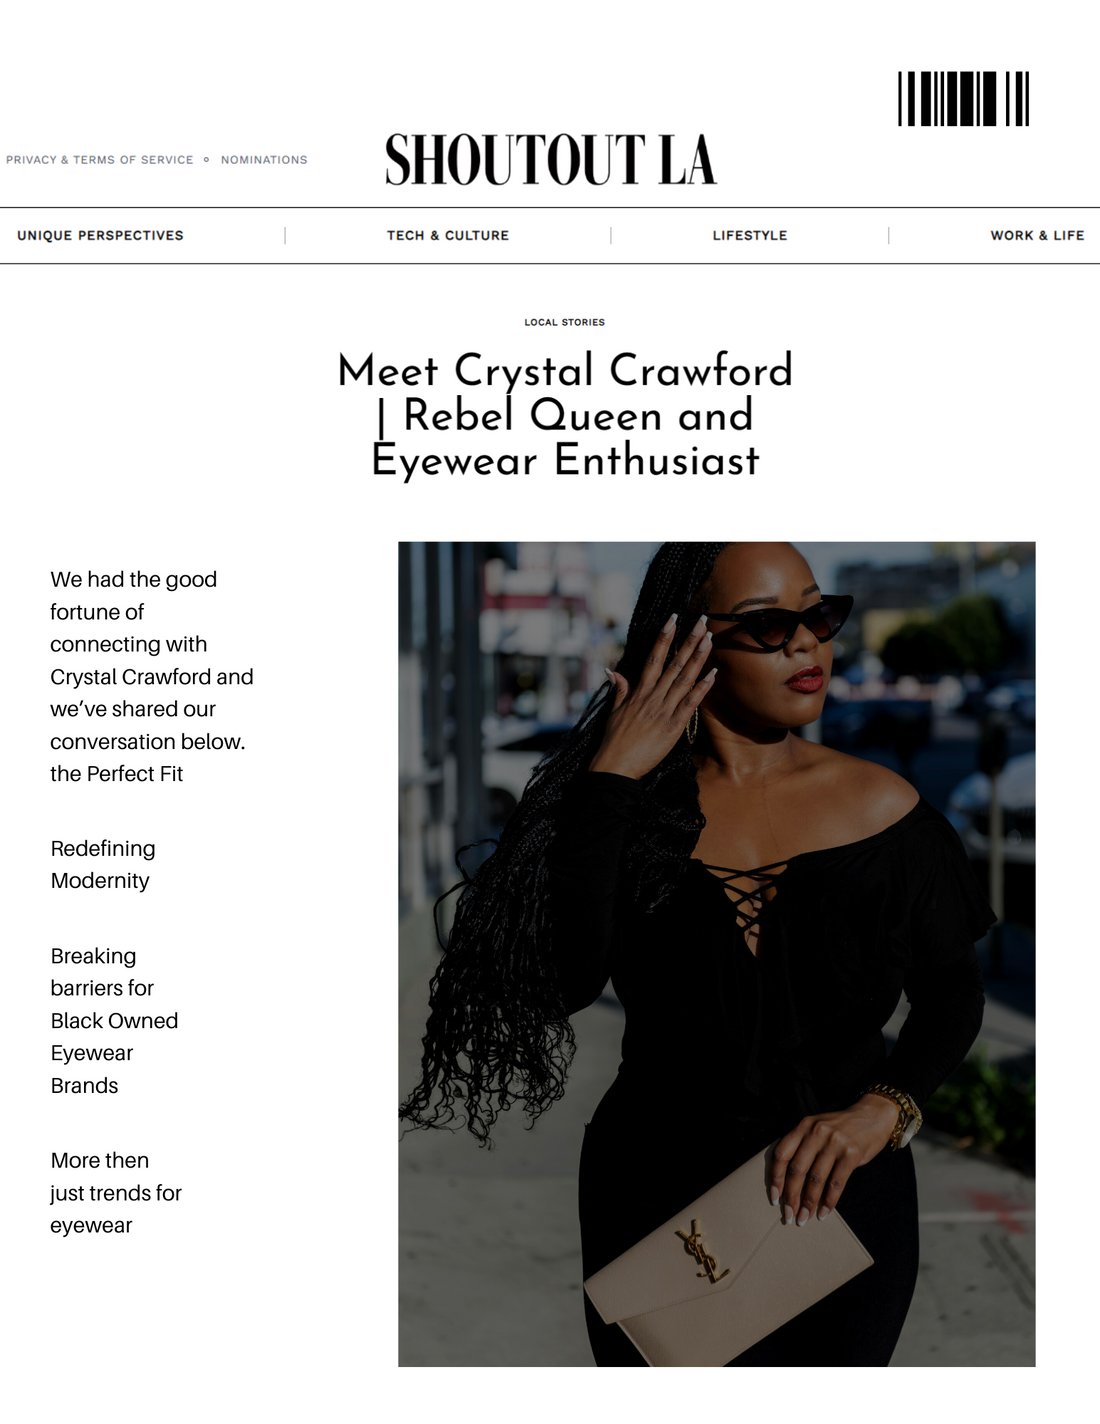 Meet a new Black Owned Eyewear Brand that's changing what it means to wear eyewear with Shout LA